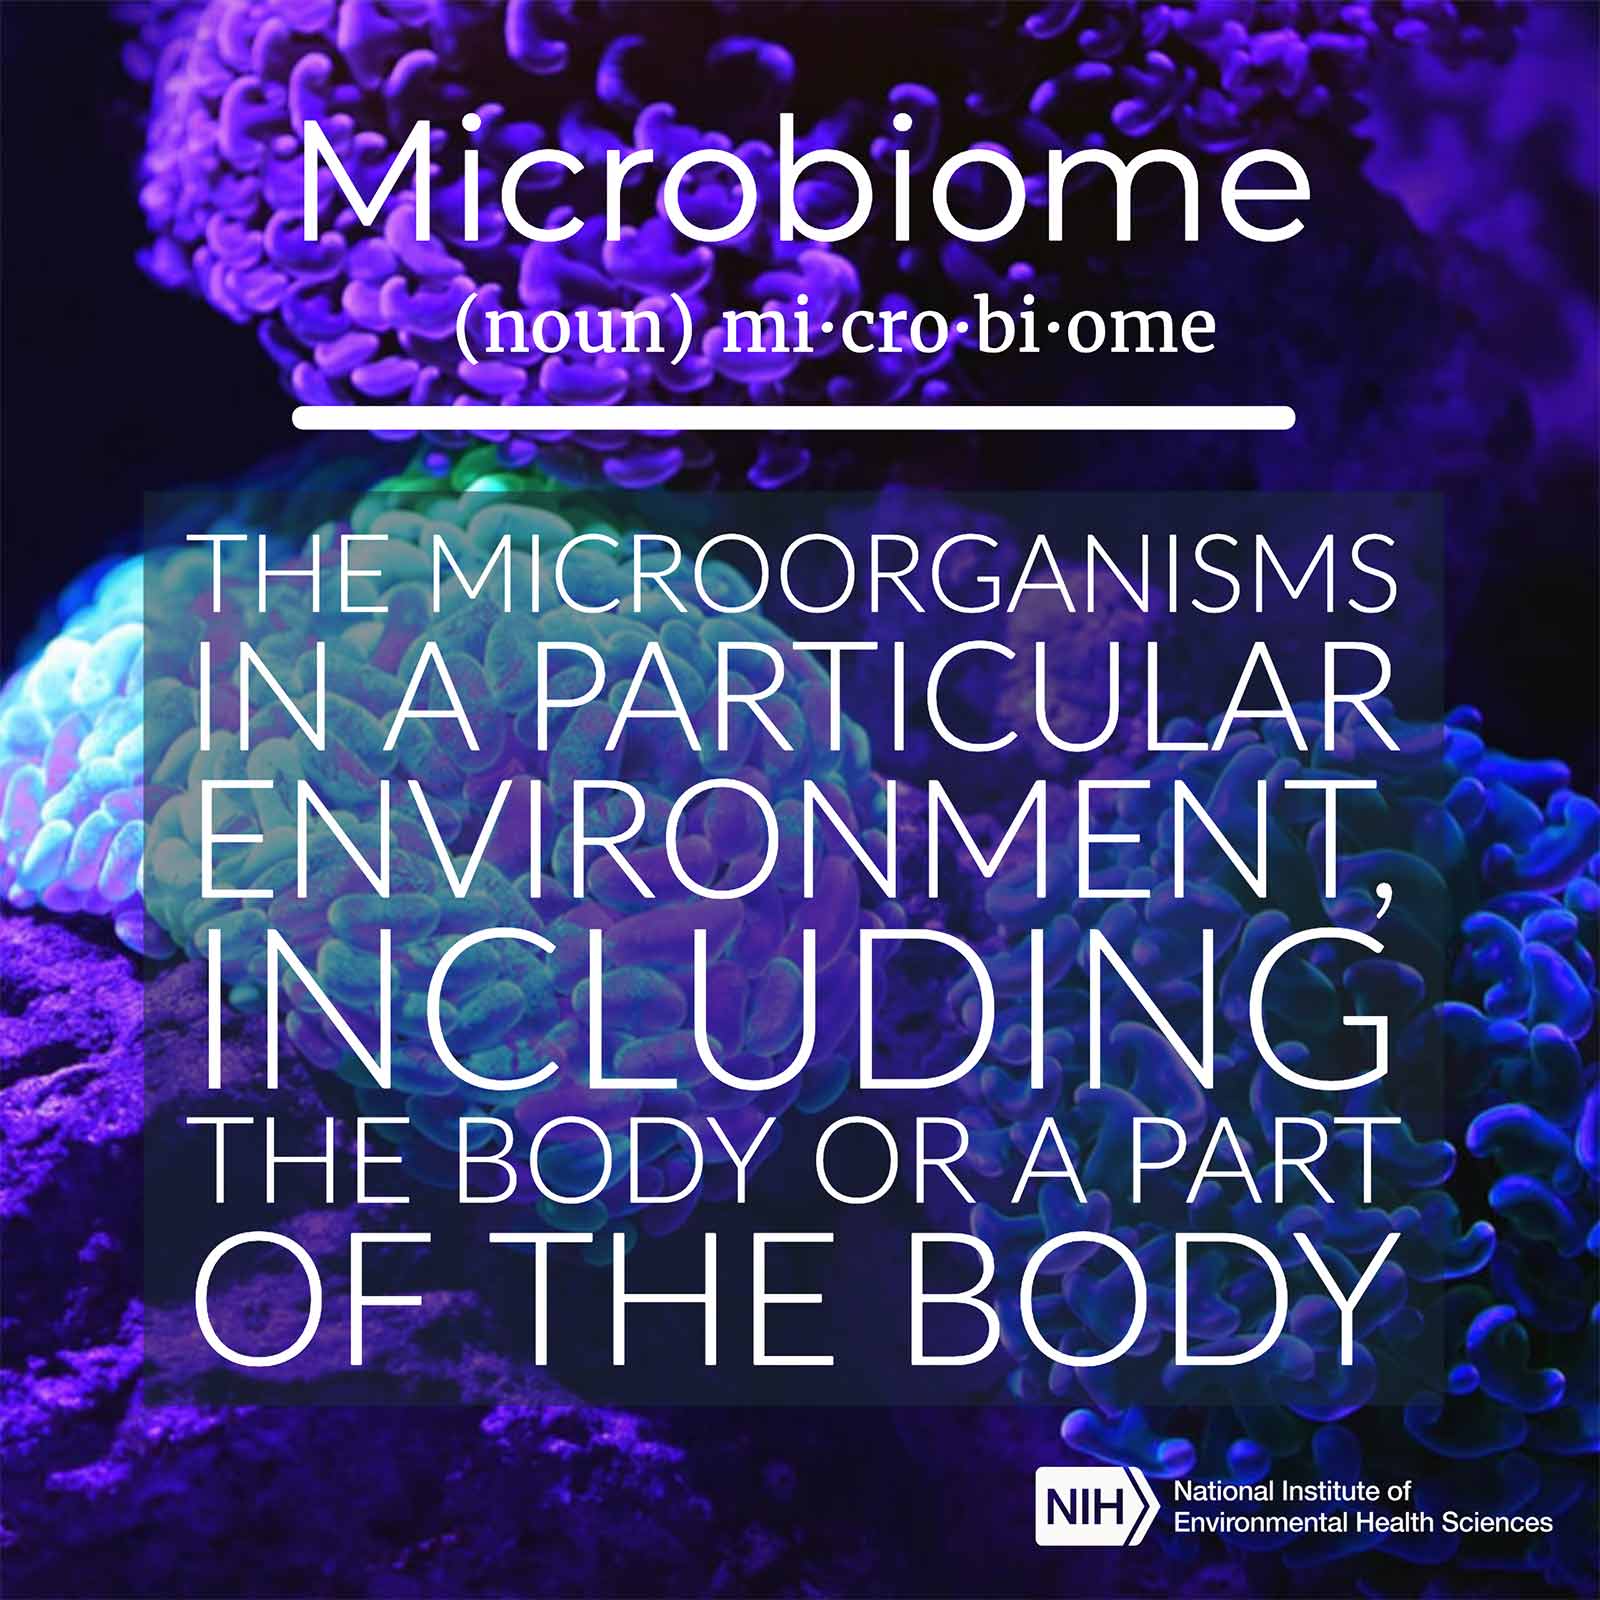 Microbiome (noun) defined as 'the microorganisms in a particular environment, including the body or a part of the body'